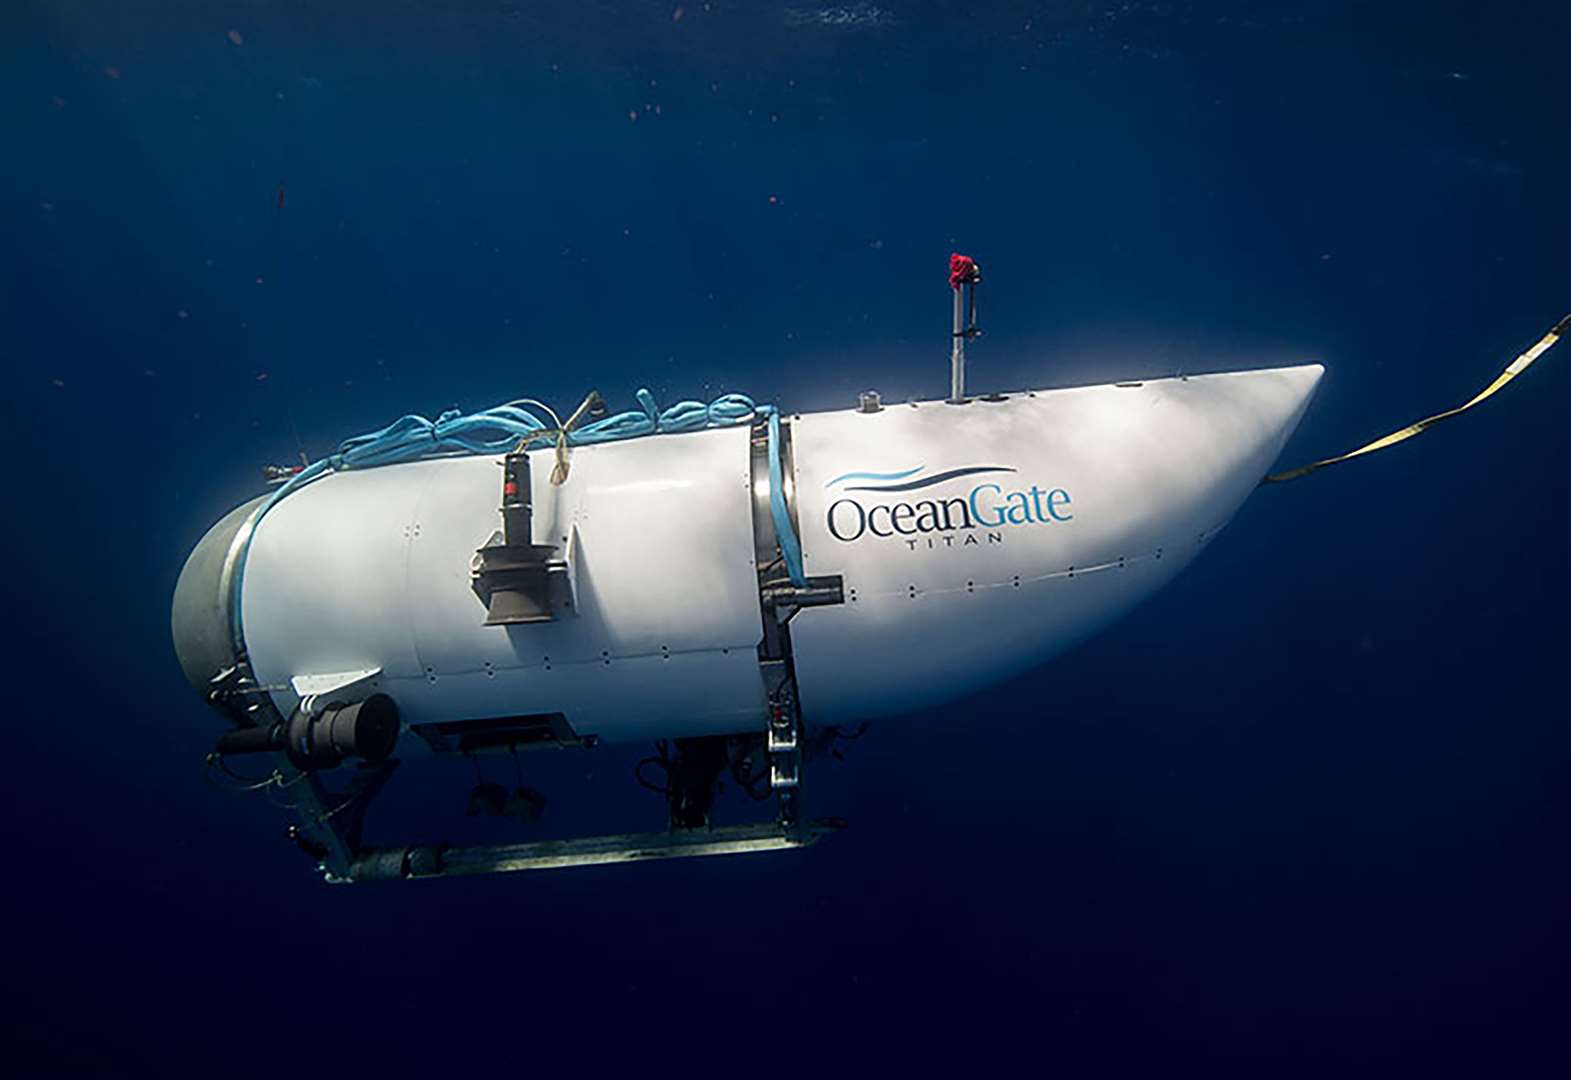 OceanGate Expeditions submersible vessel named Titan (OceanGate Expeditions/ PA)